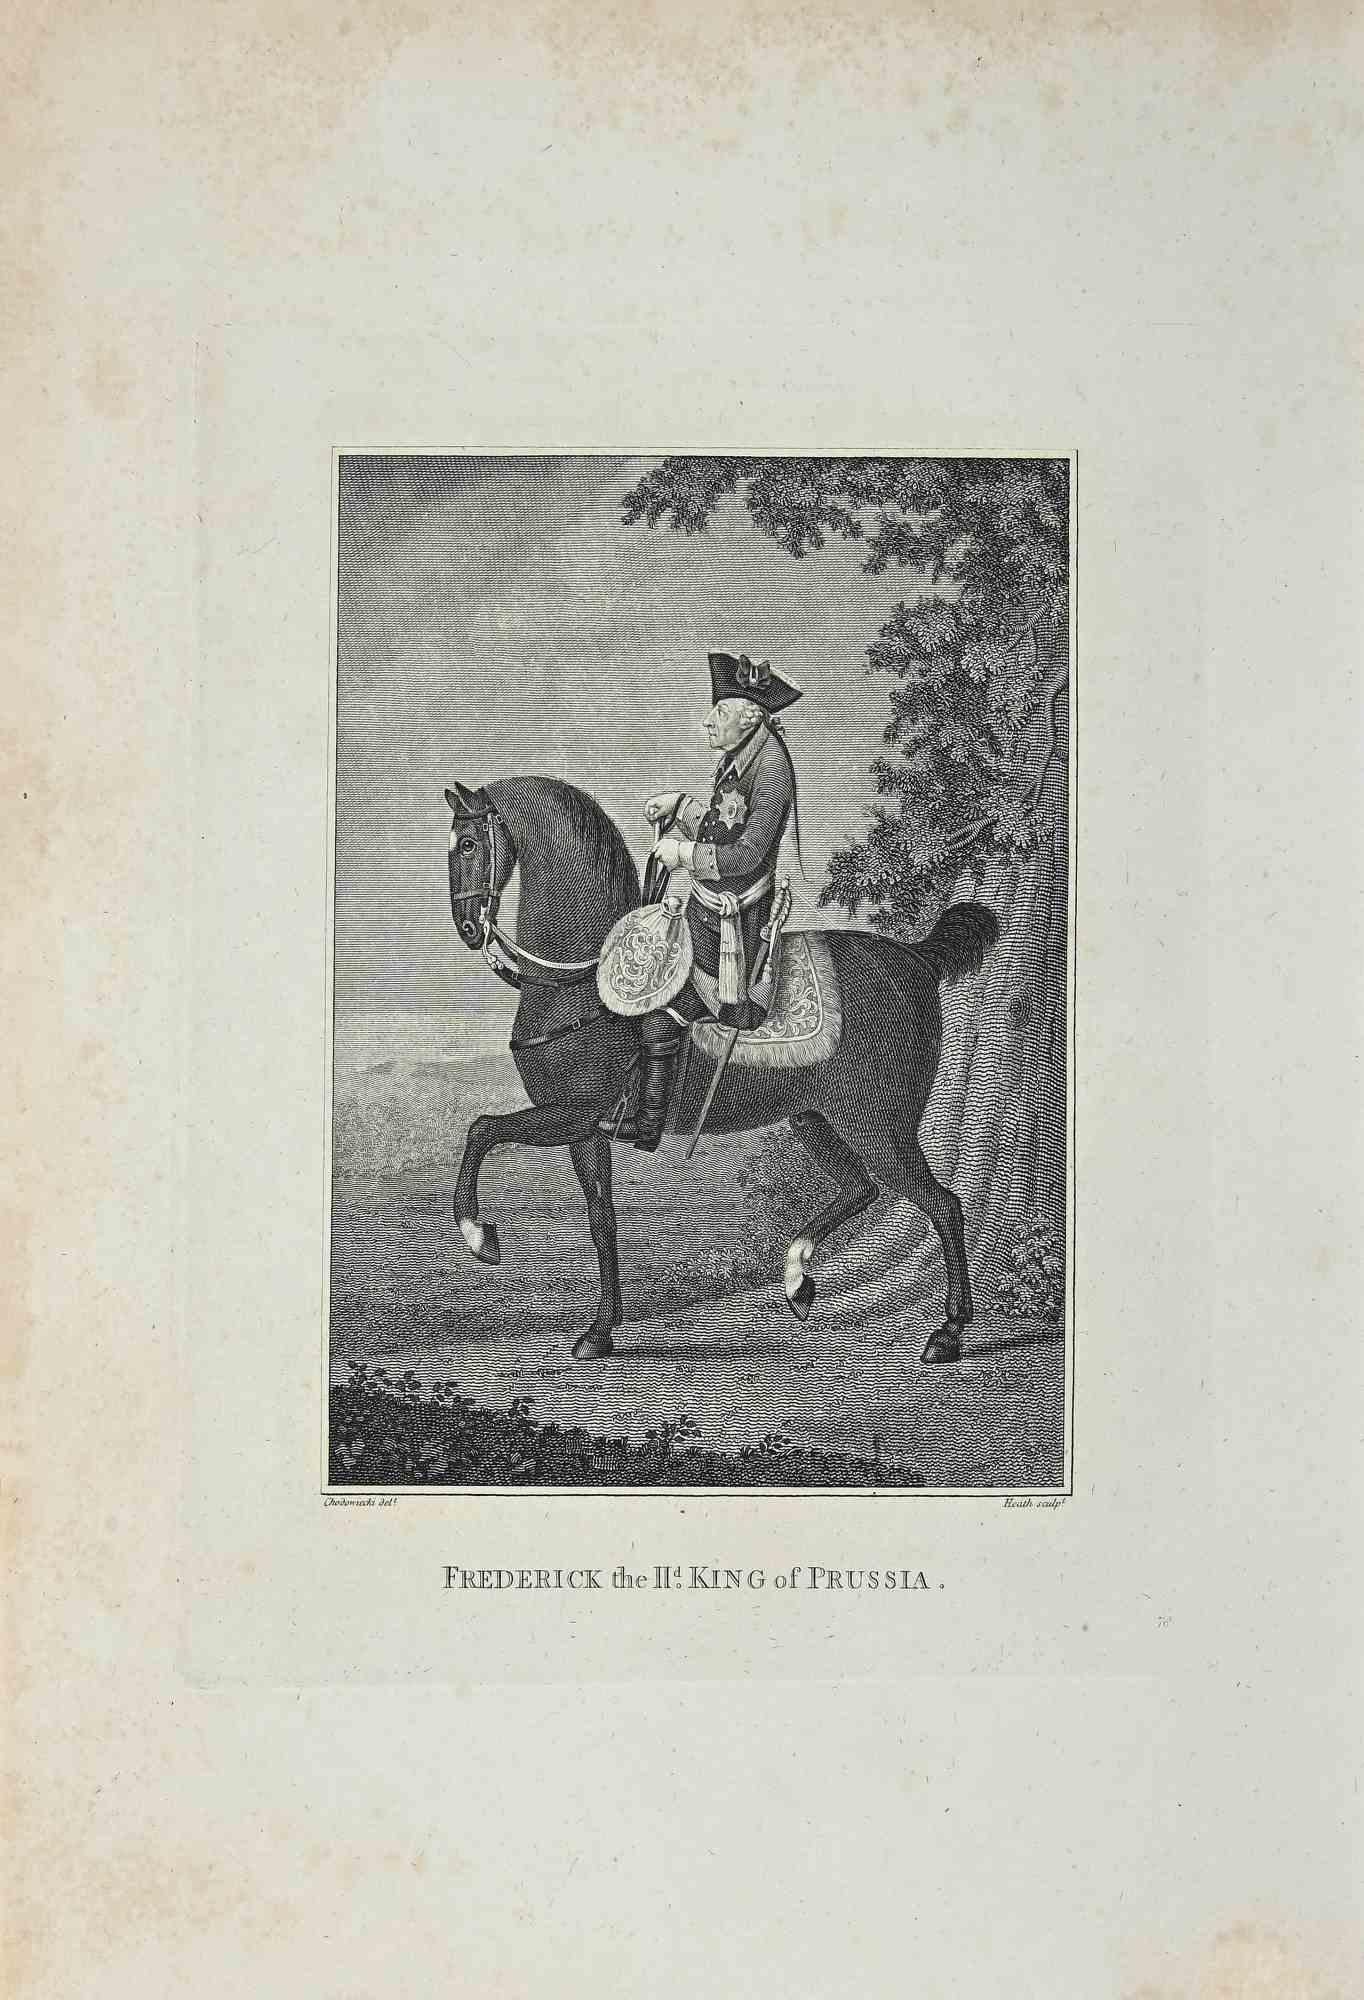 Portrait of Frederick 2nd is an original artwork realized by James Heath (1757 - 1834).

Original Etching from J.C. Lavater's "Essays on Physiognomy, Designed to promote the Knowledge and the Love of Mankind", London, Bensley, 1810. 

A the bottom